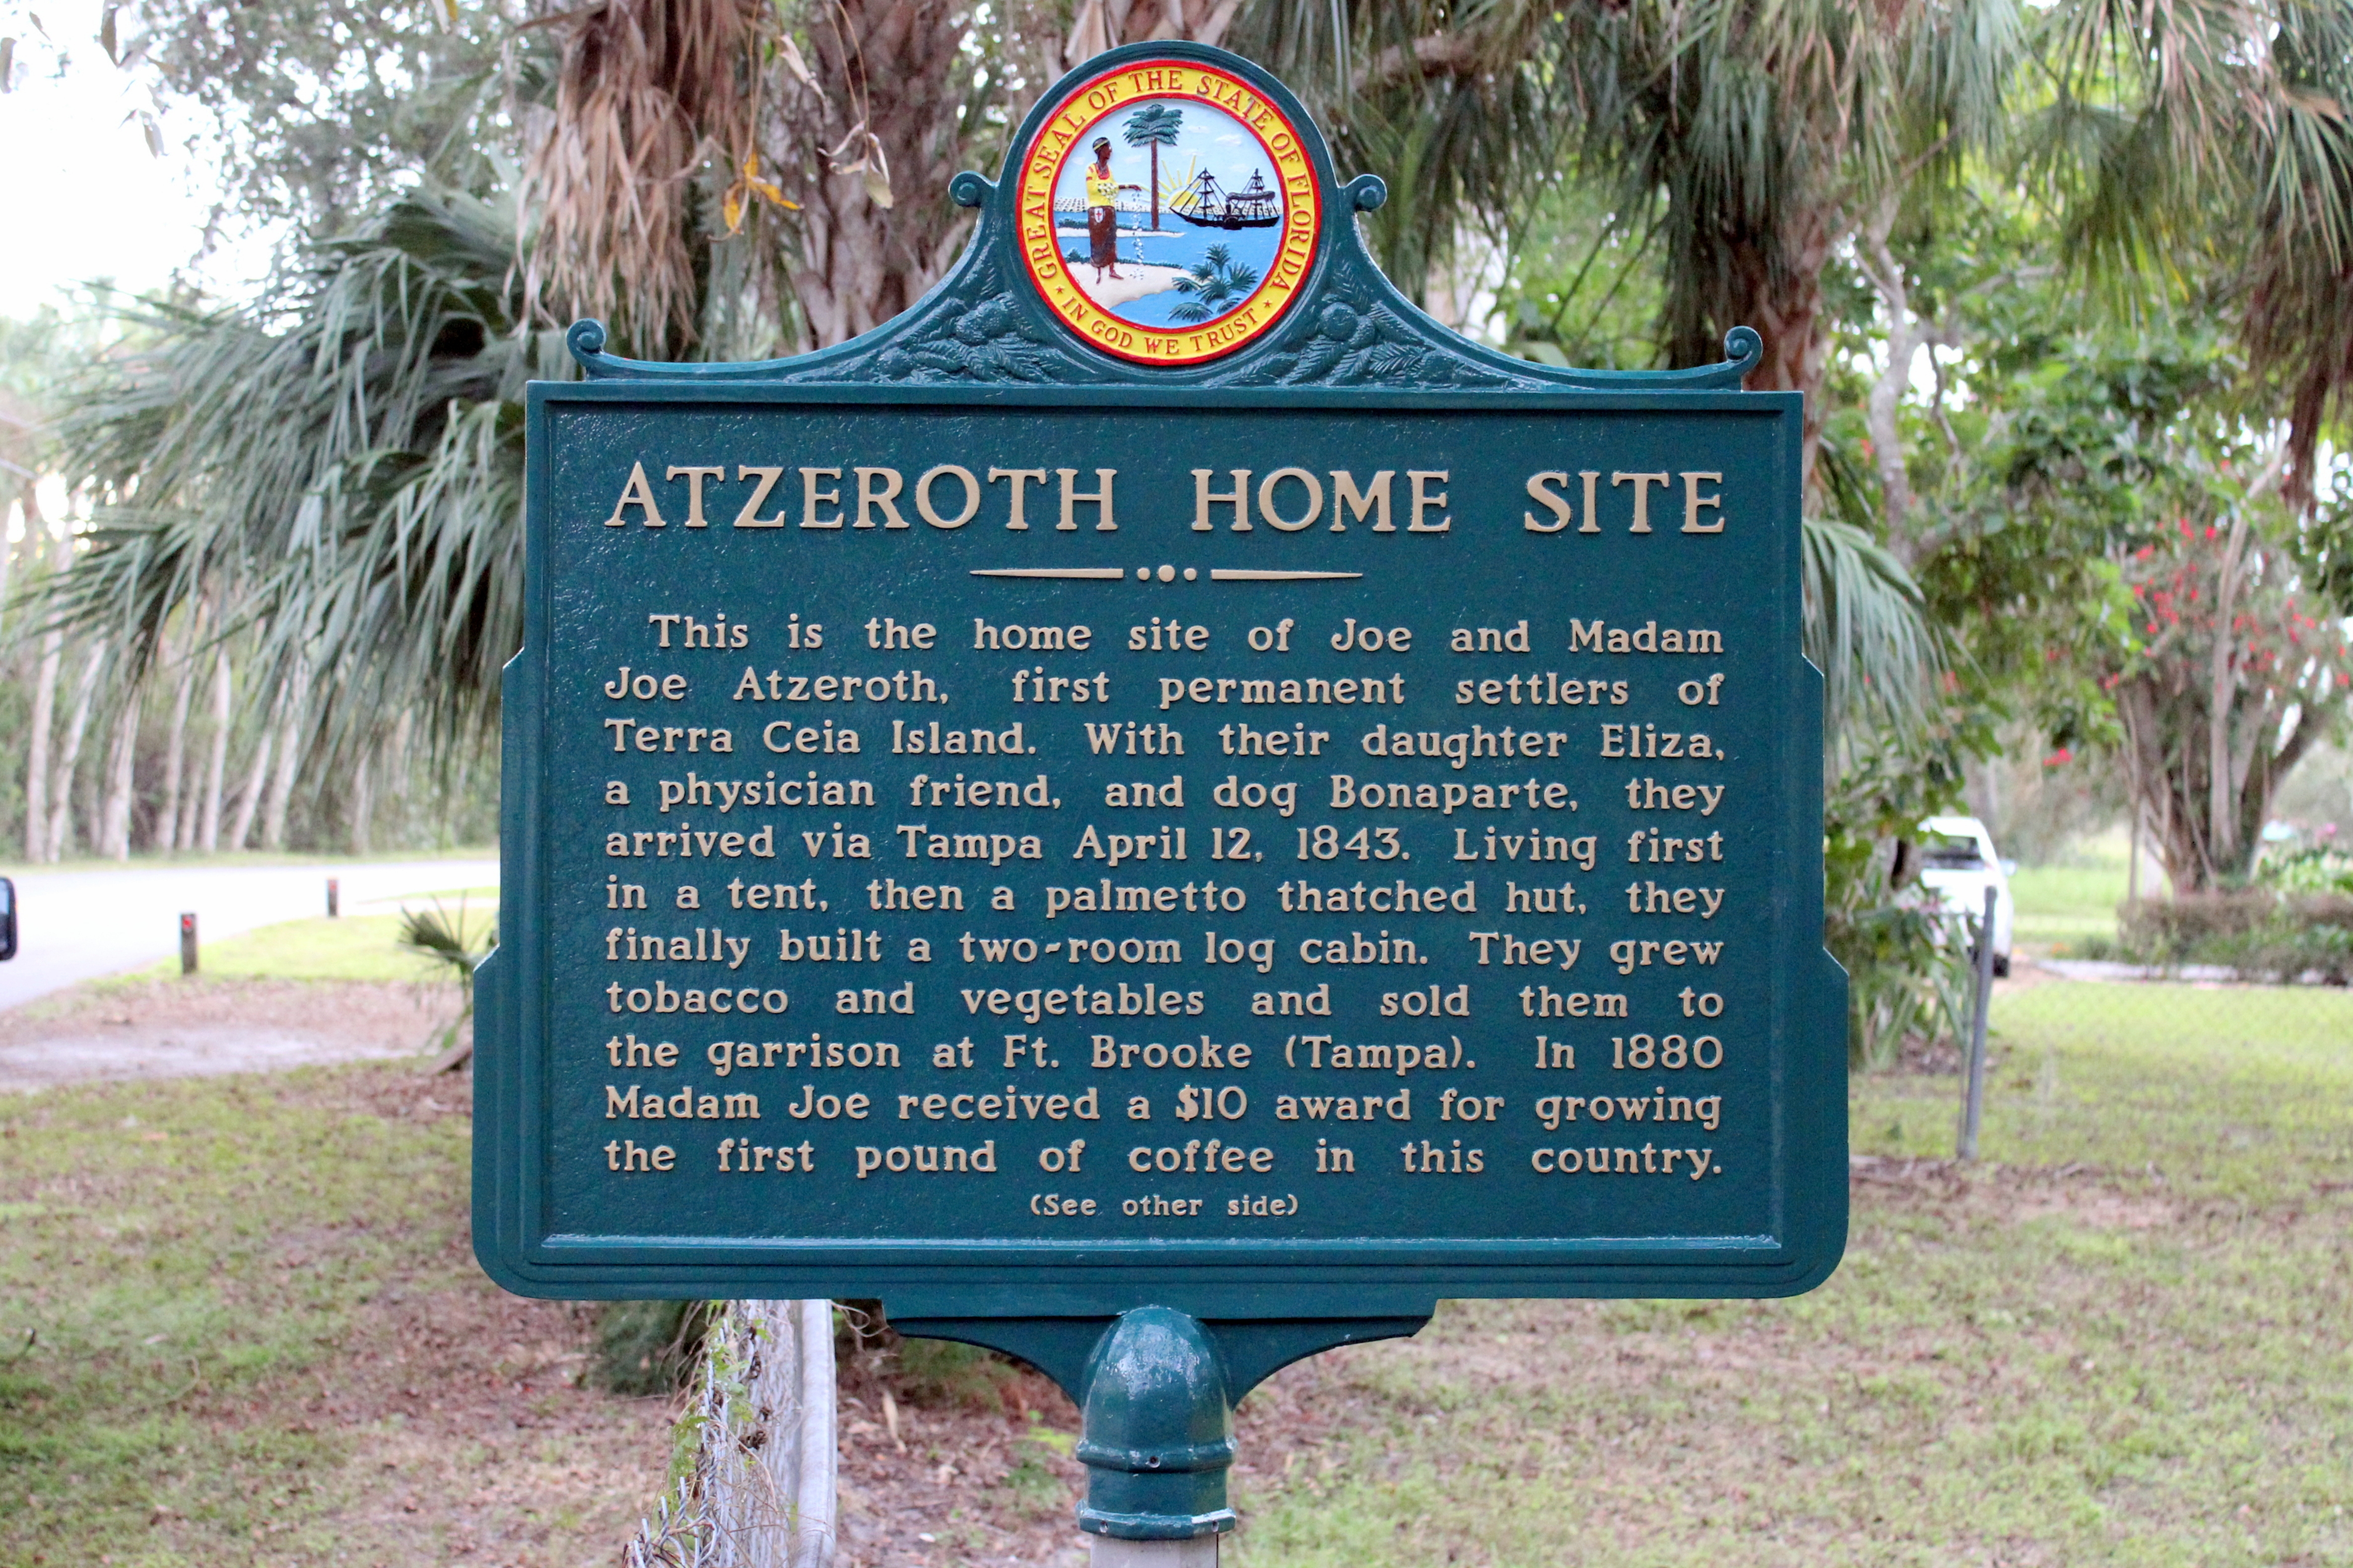 Atzeroth Home Site Marker-Side 1